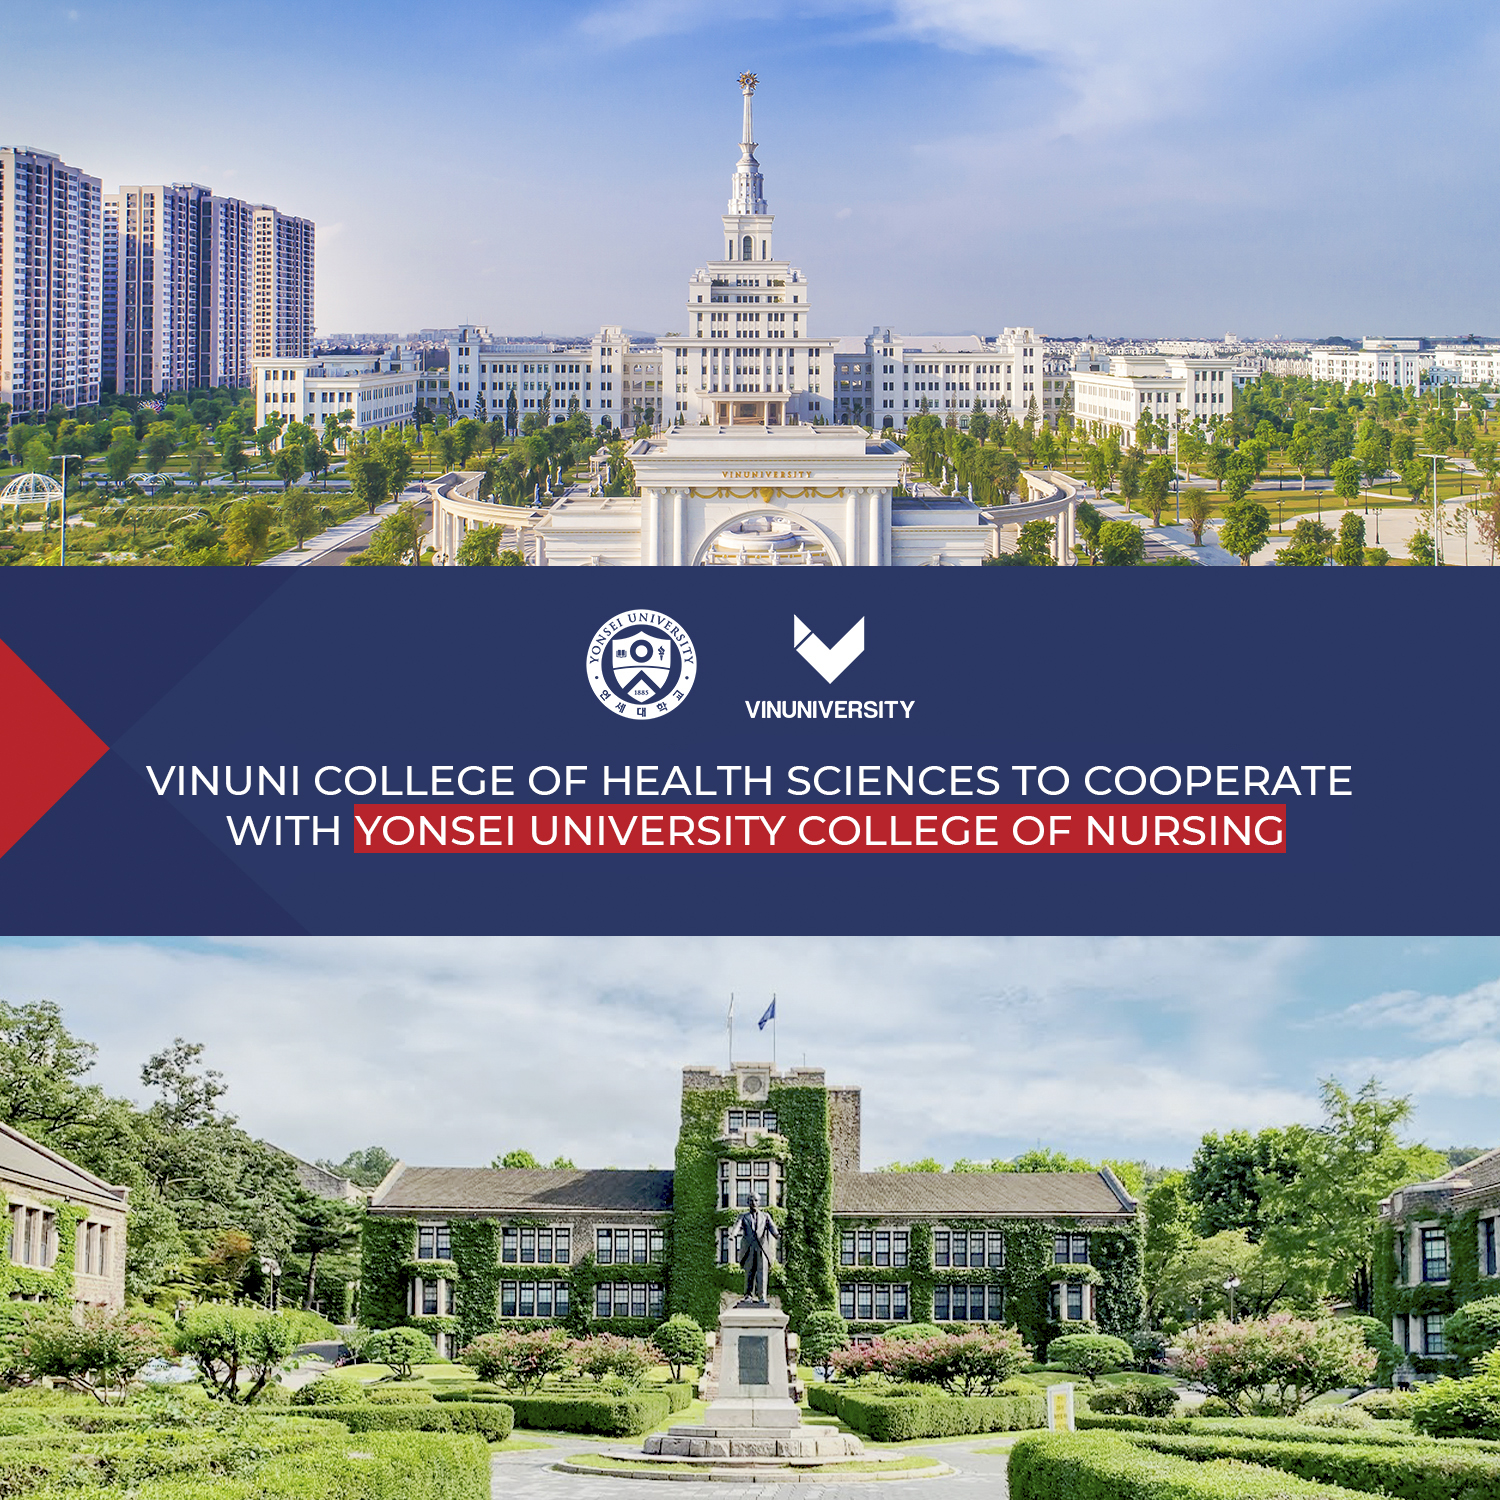 VinUni College of Health Sciences to cooperate with Yonsei University College of Nursing